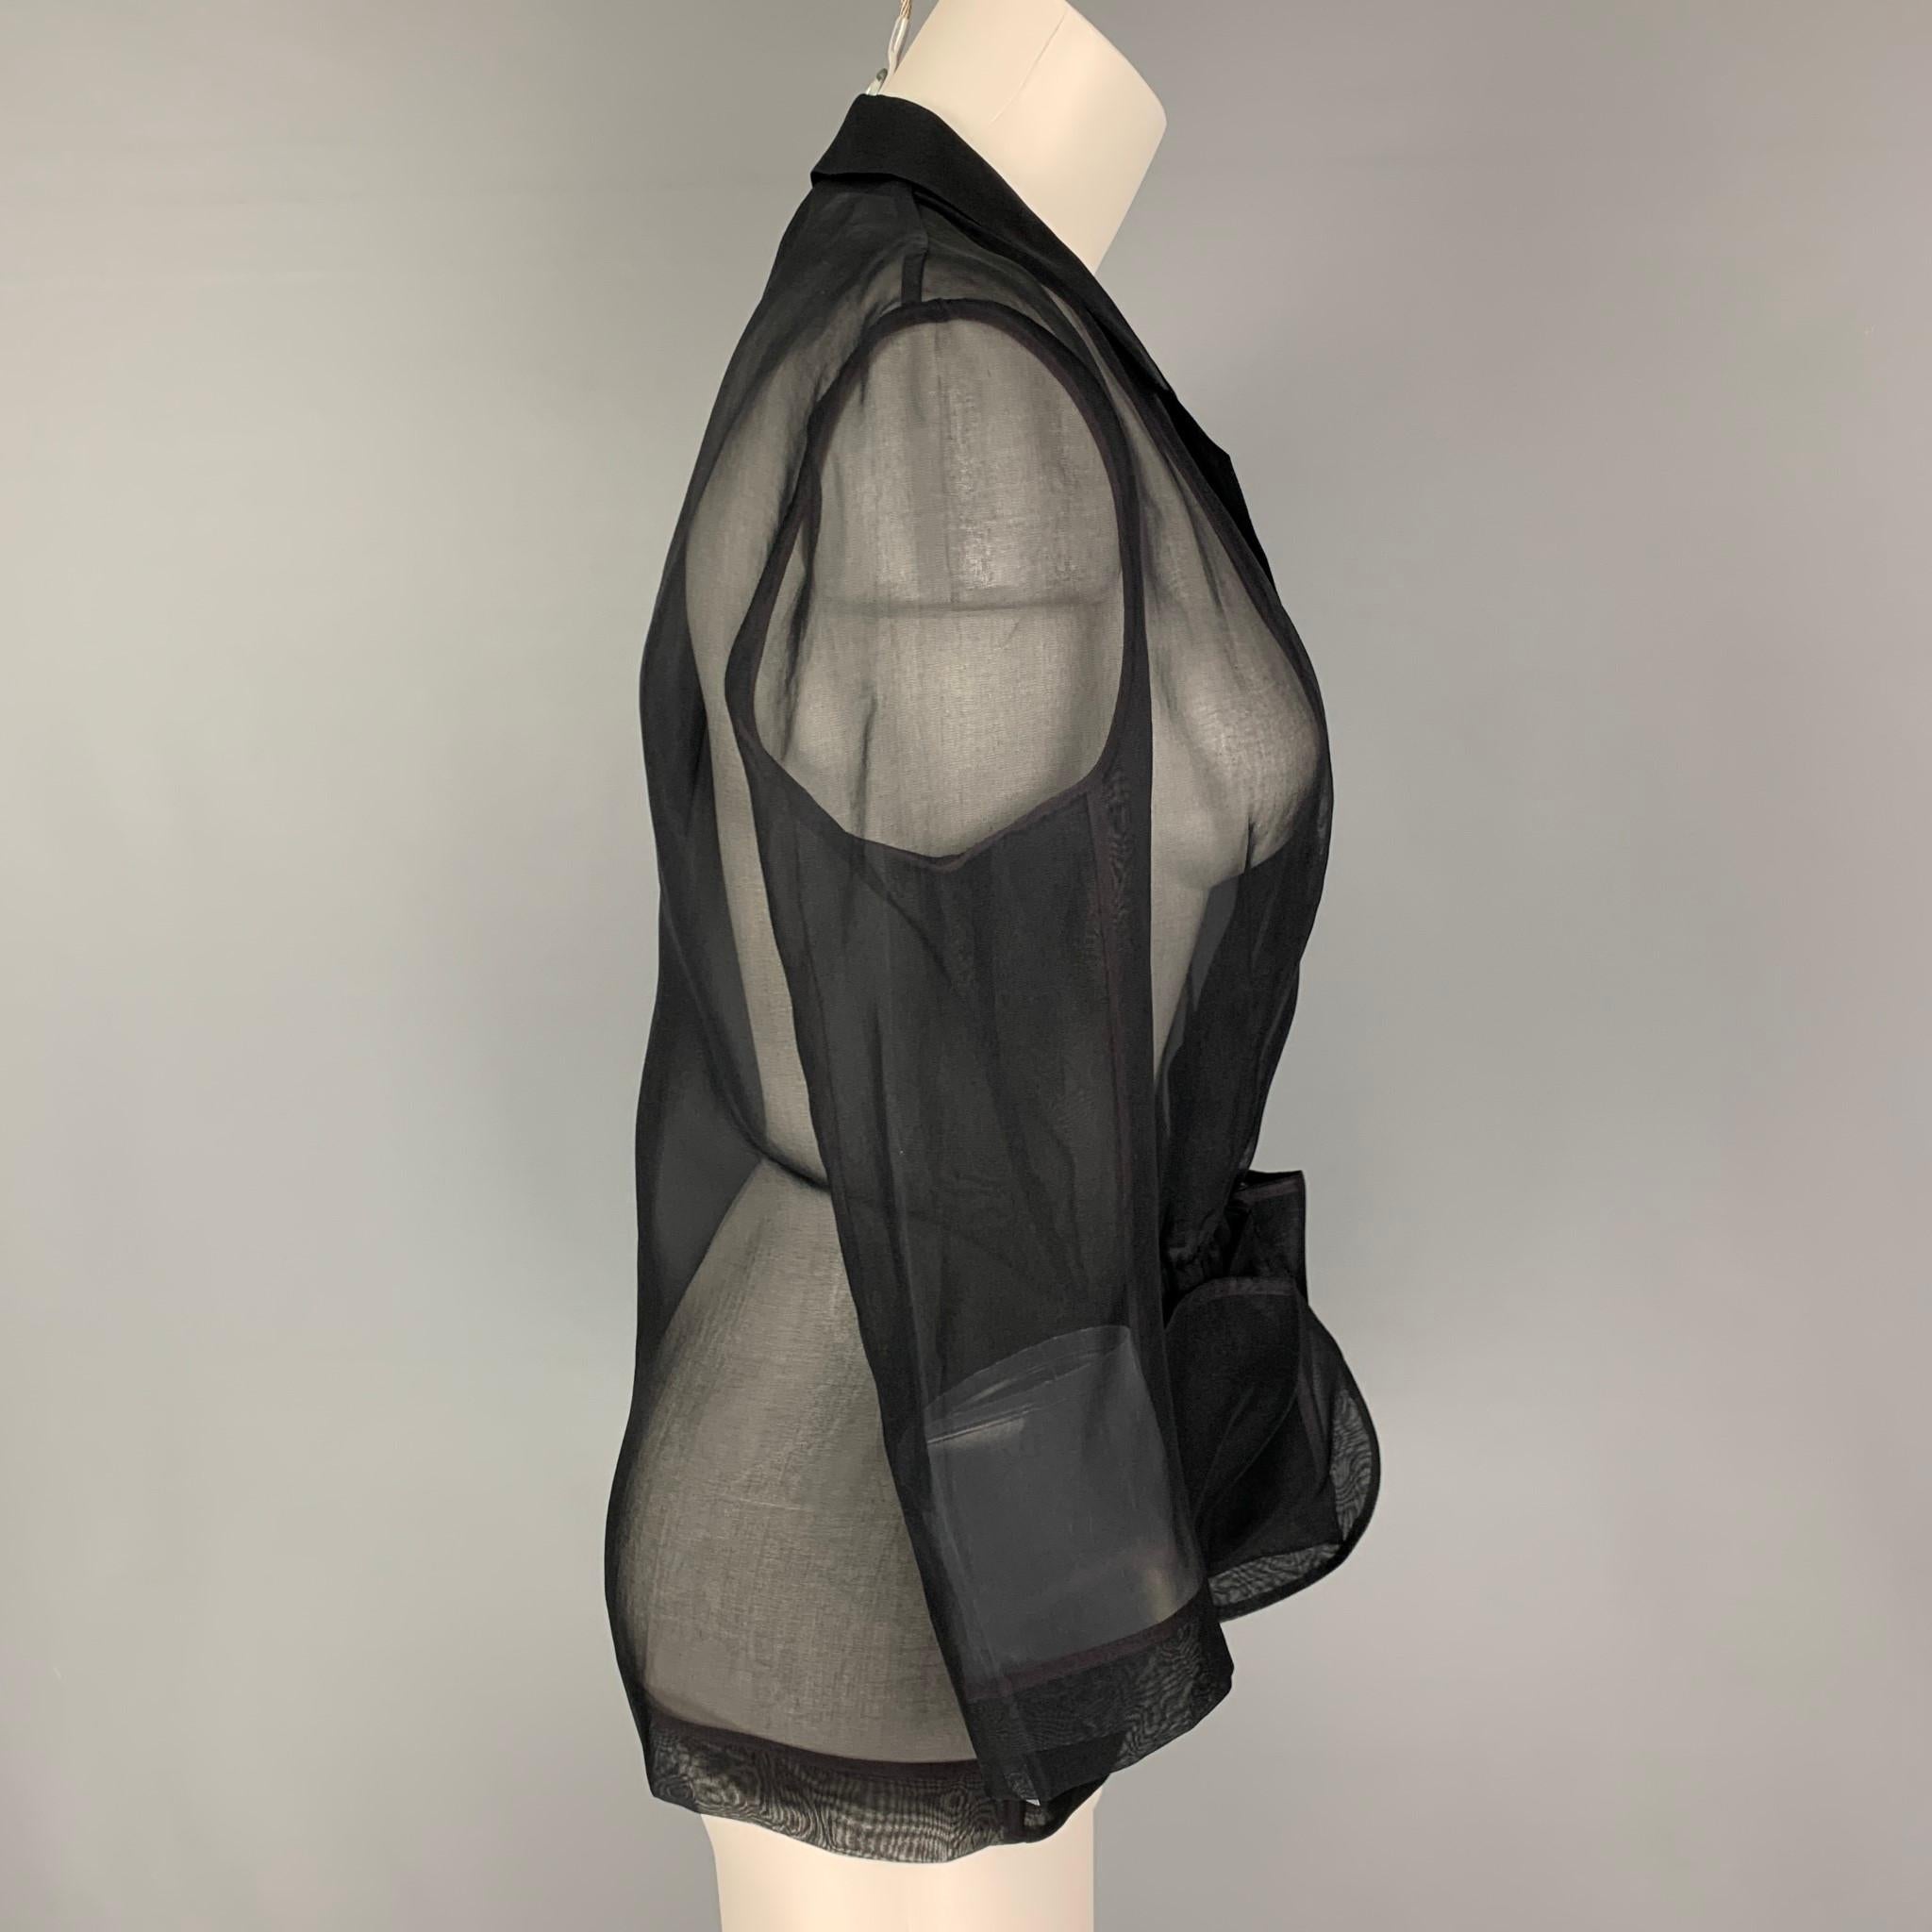 PORTS 1961 jacket comes in a black see through silk featuring a notch lapel, patch pockets, and a sel tie belted closure. 

Very Good Pre-Owned Condition.
Marked: 10

Measurements:

Shoulder: 16 in.
Bust: 38 in.
Sleeve: 19 in.
Length: 25 in. 

